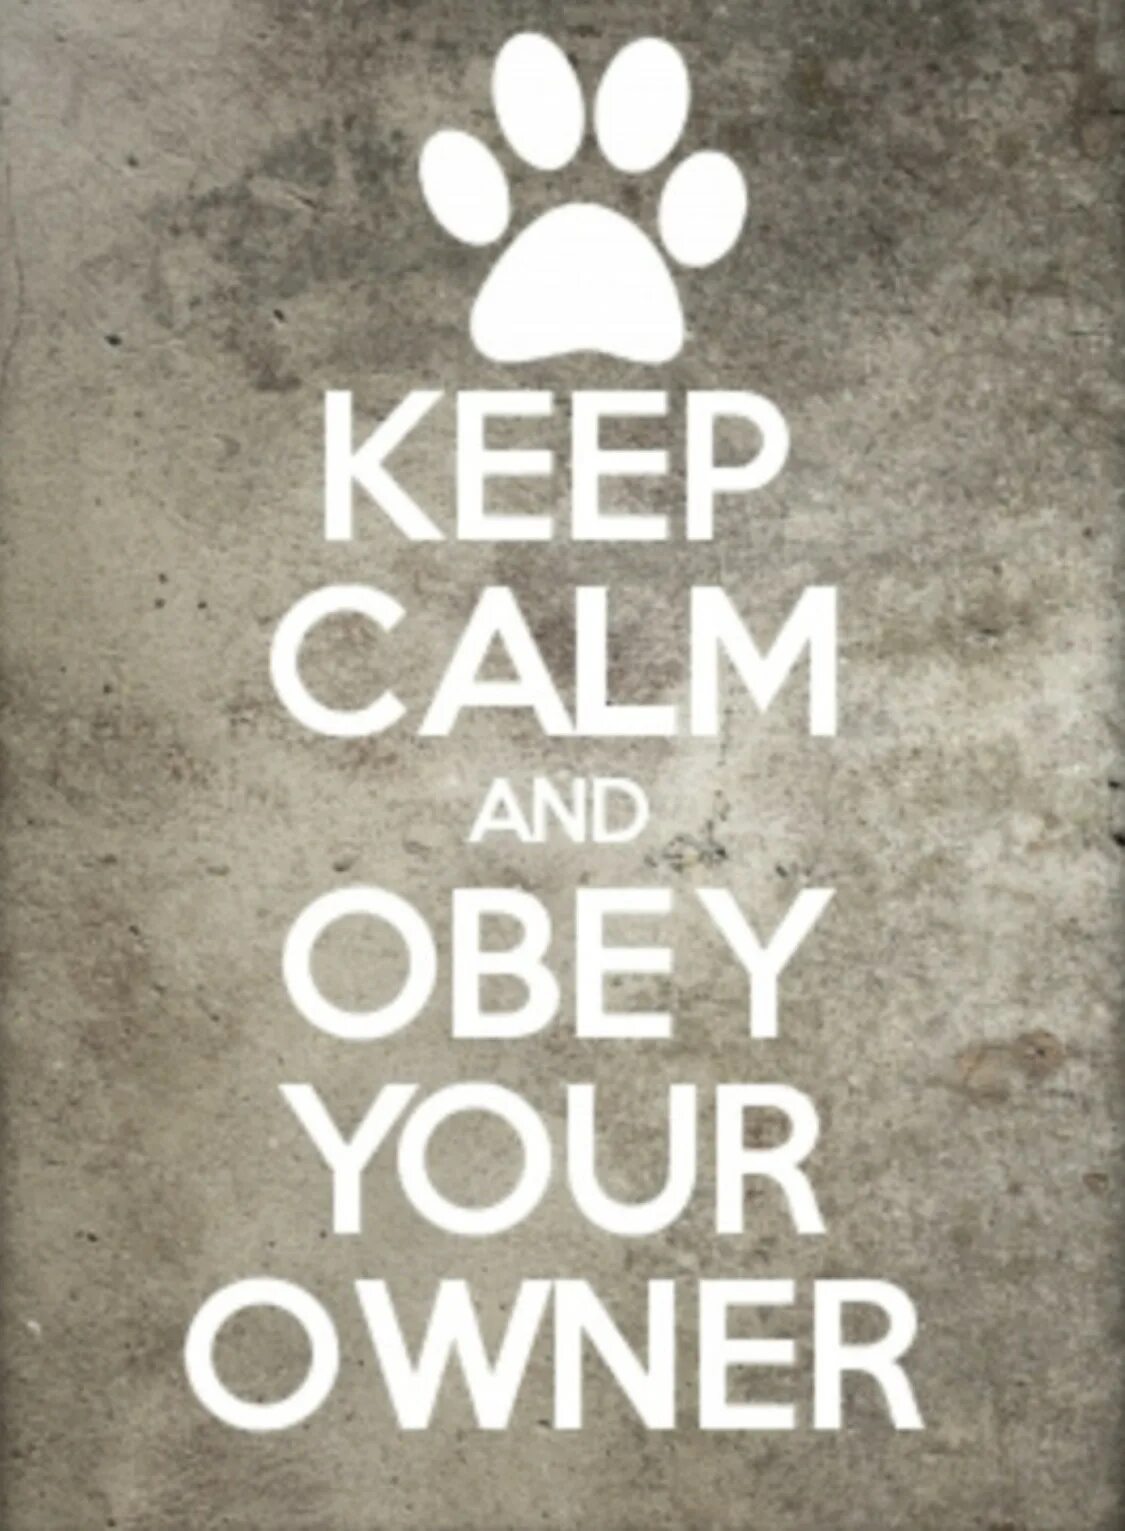 Keep Calm and Obey. Keep Calm and Obey your wife. Keep Sweet: Pray and Obey. Calm down and Breath.